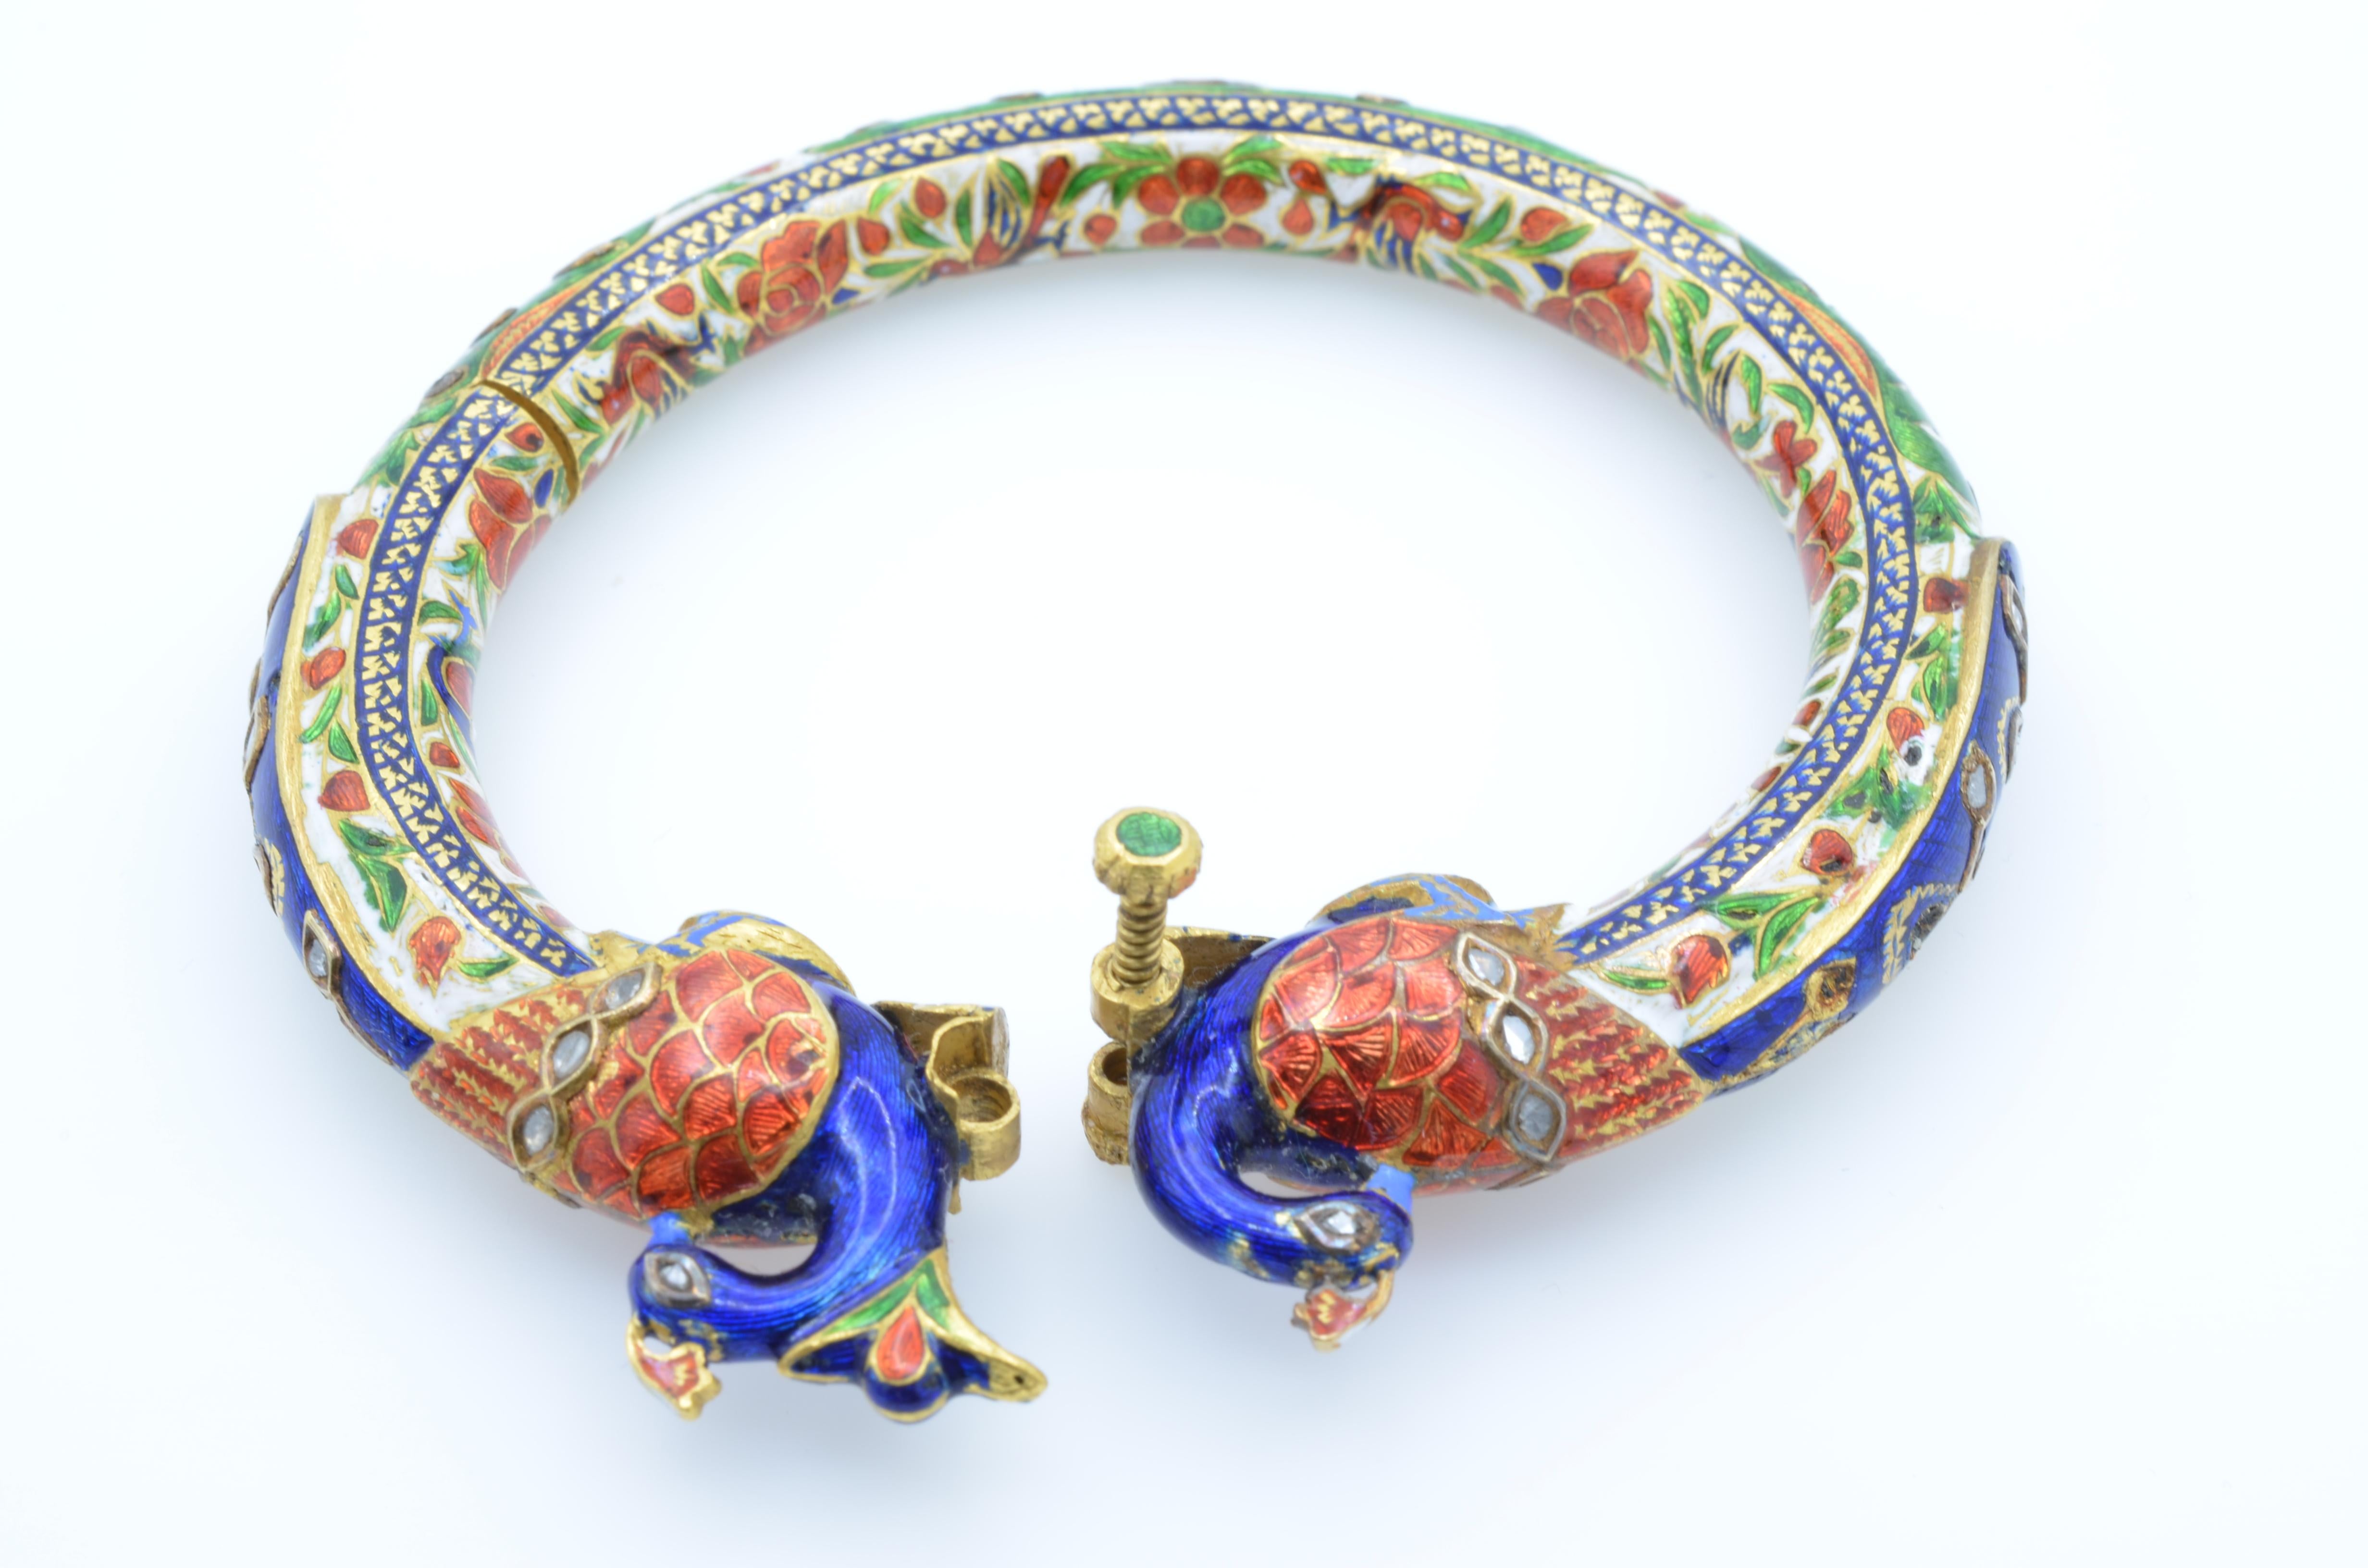 East Indian Mughal Enamel Peacock 22K Gold Bangle with Kundan Set Diamond Rubies In Good Condition For Sale In Berkeley, CA